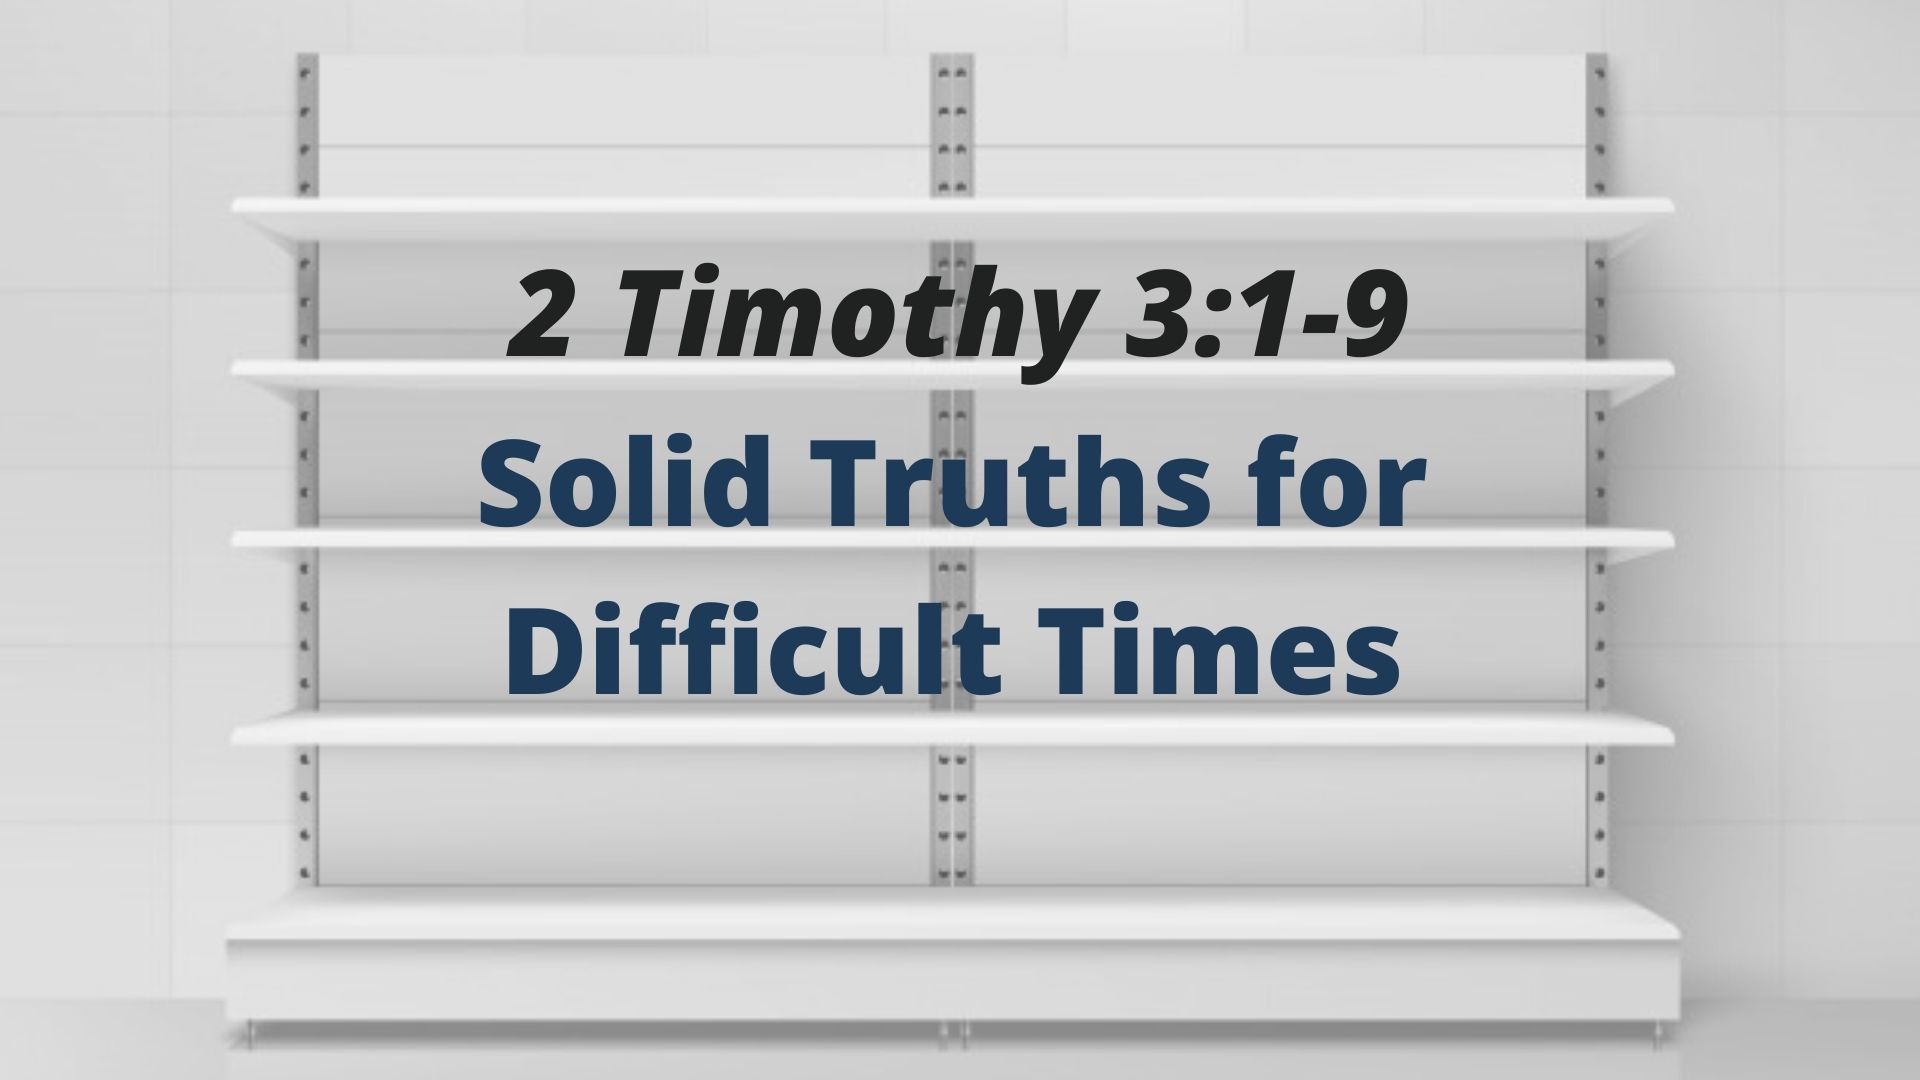 Solid Truths for Difficult Times (2 Timothy 3:1-9)